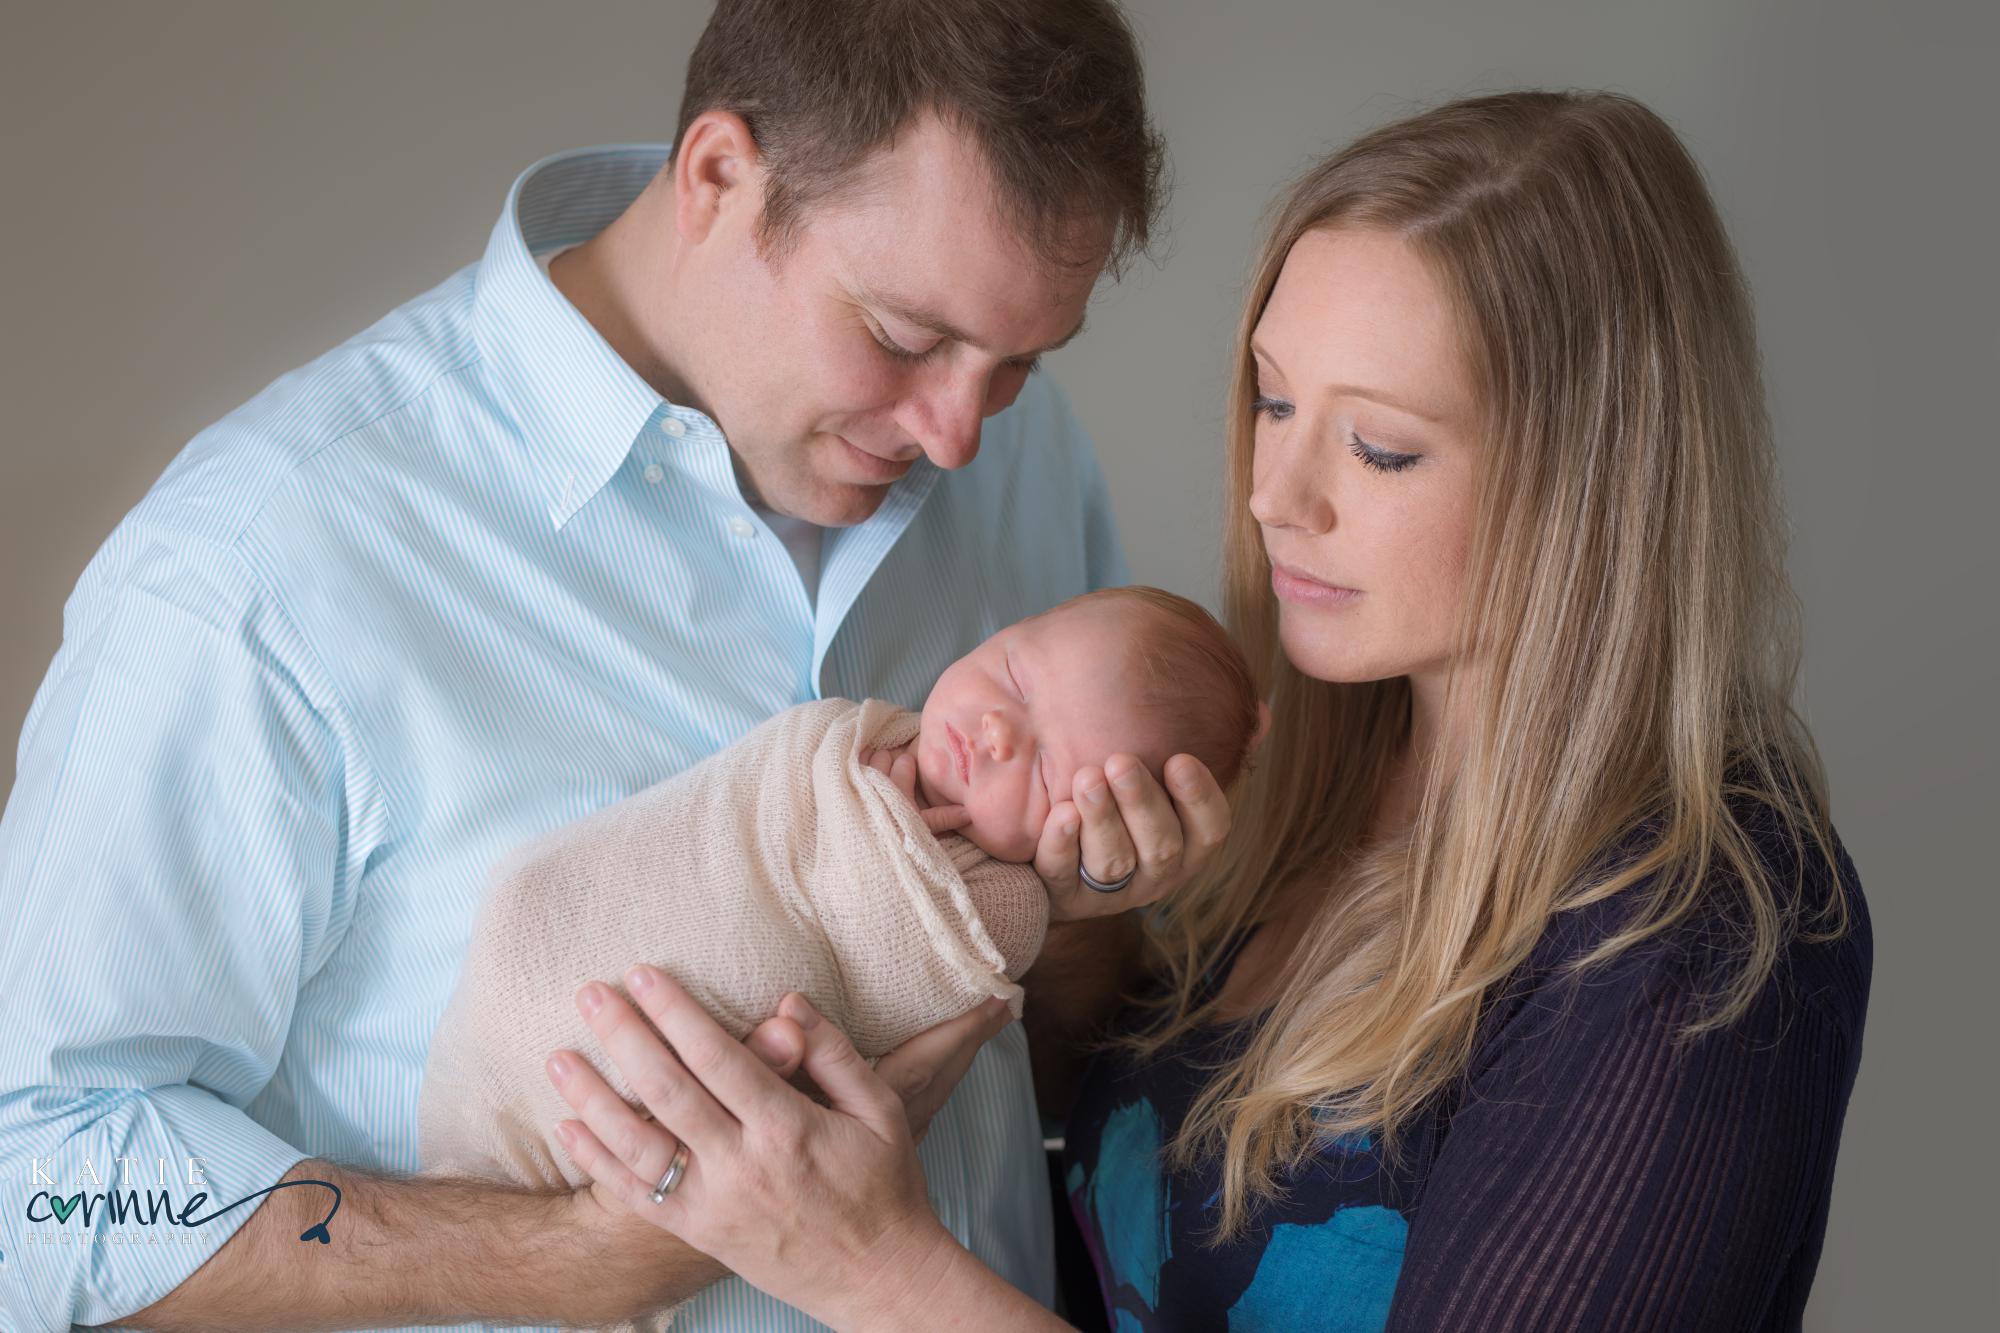 Parents hold new baby girl against plain backdrop